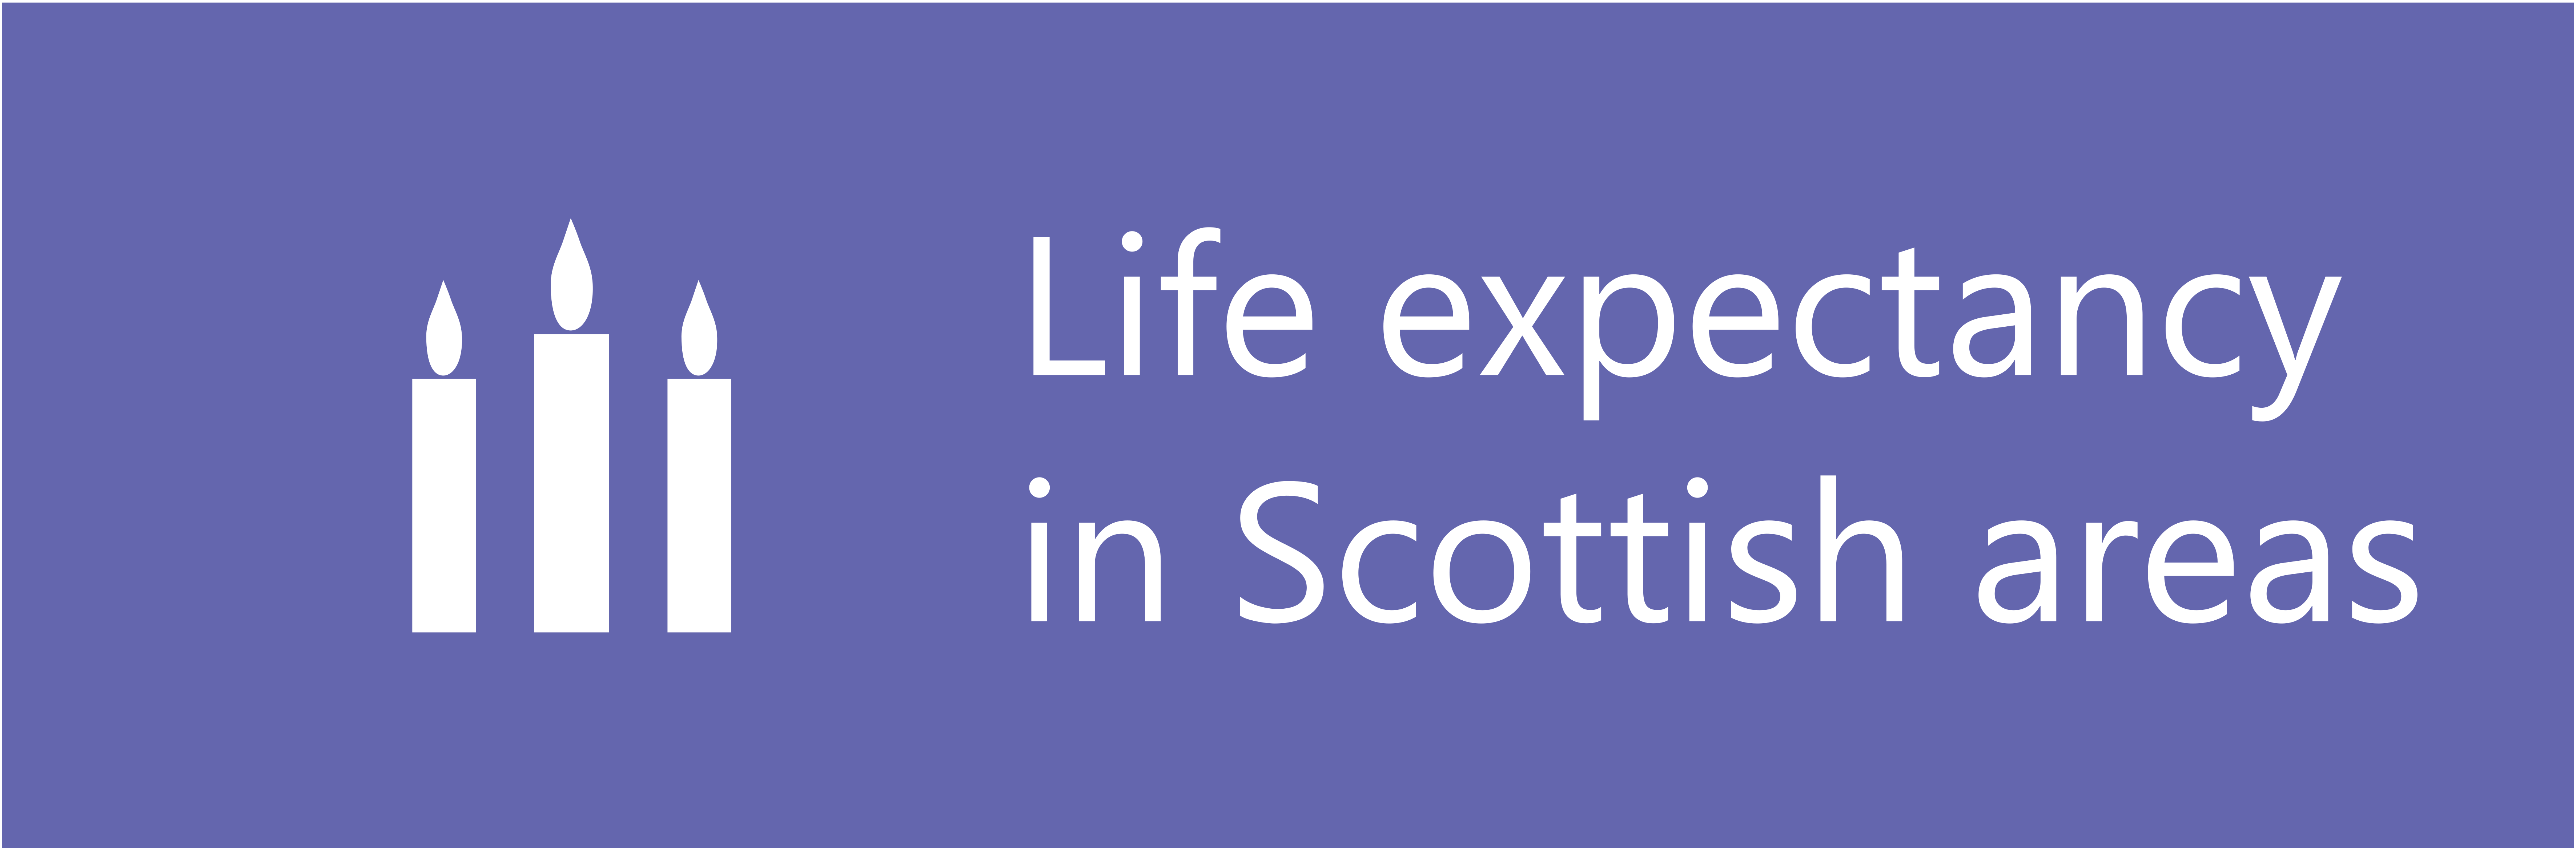 Links to Life Expectancy for Scottish Area, 2015-17 infographic